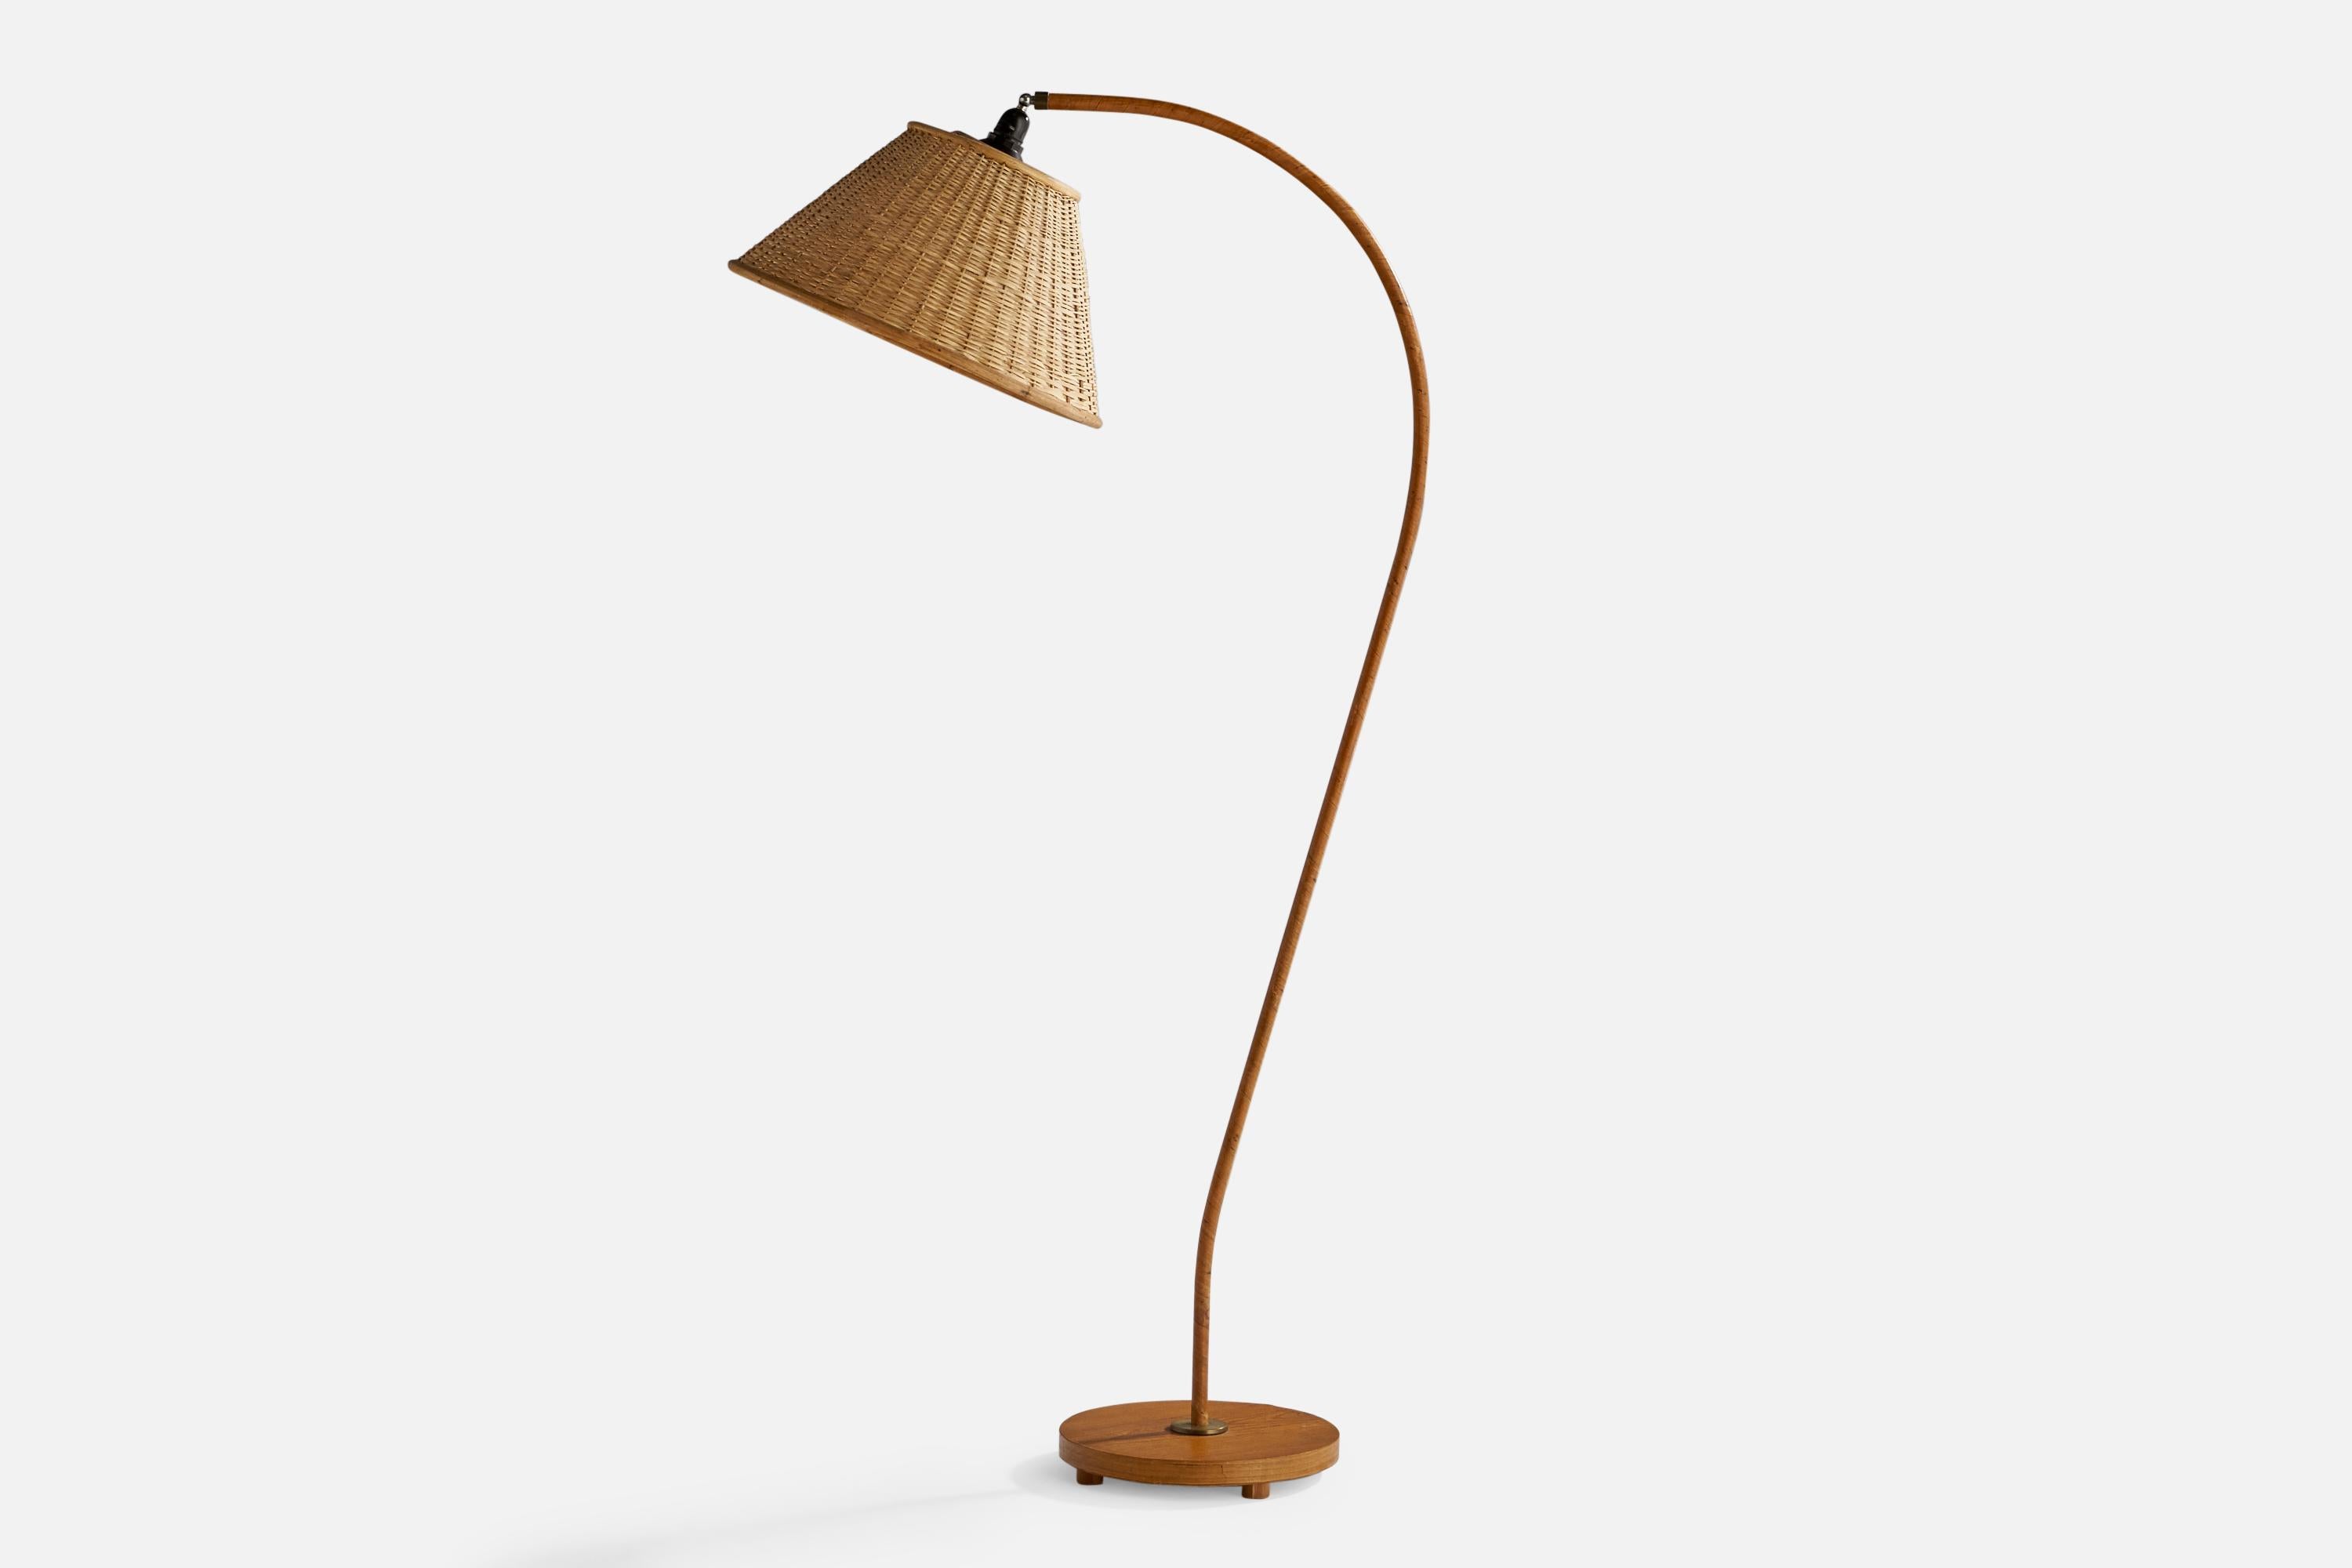 A curved elm, wood veneer, brass and rattan floor lamp designed and produced in Sweden, c. 1940s.

Overall Dimensions (inches): 65” H x 18.75” W x 28.75” D
Bulb Specifications: E-26 Bulb
Number of Sockets: 1
 
All lighting will be converted for US